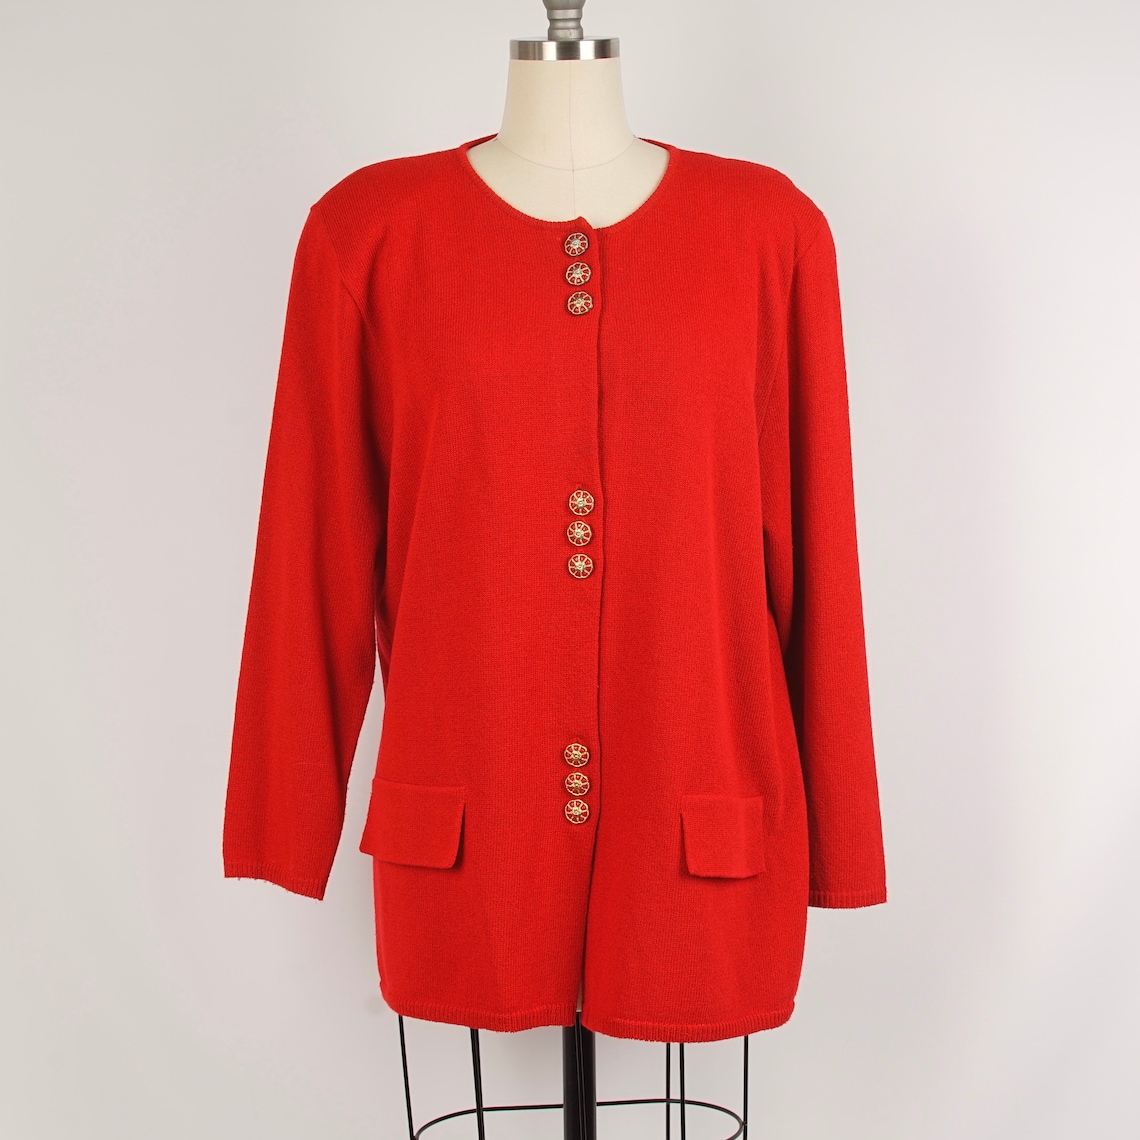 Dressy Red Cardigan With Gold Buttons Collarless Knit Jacket - Etsy ...